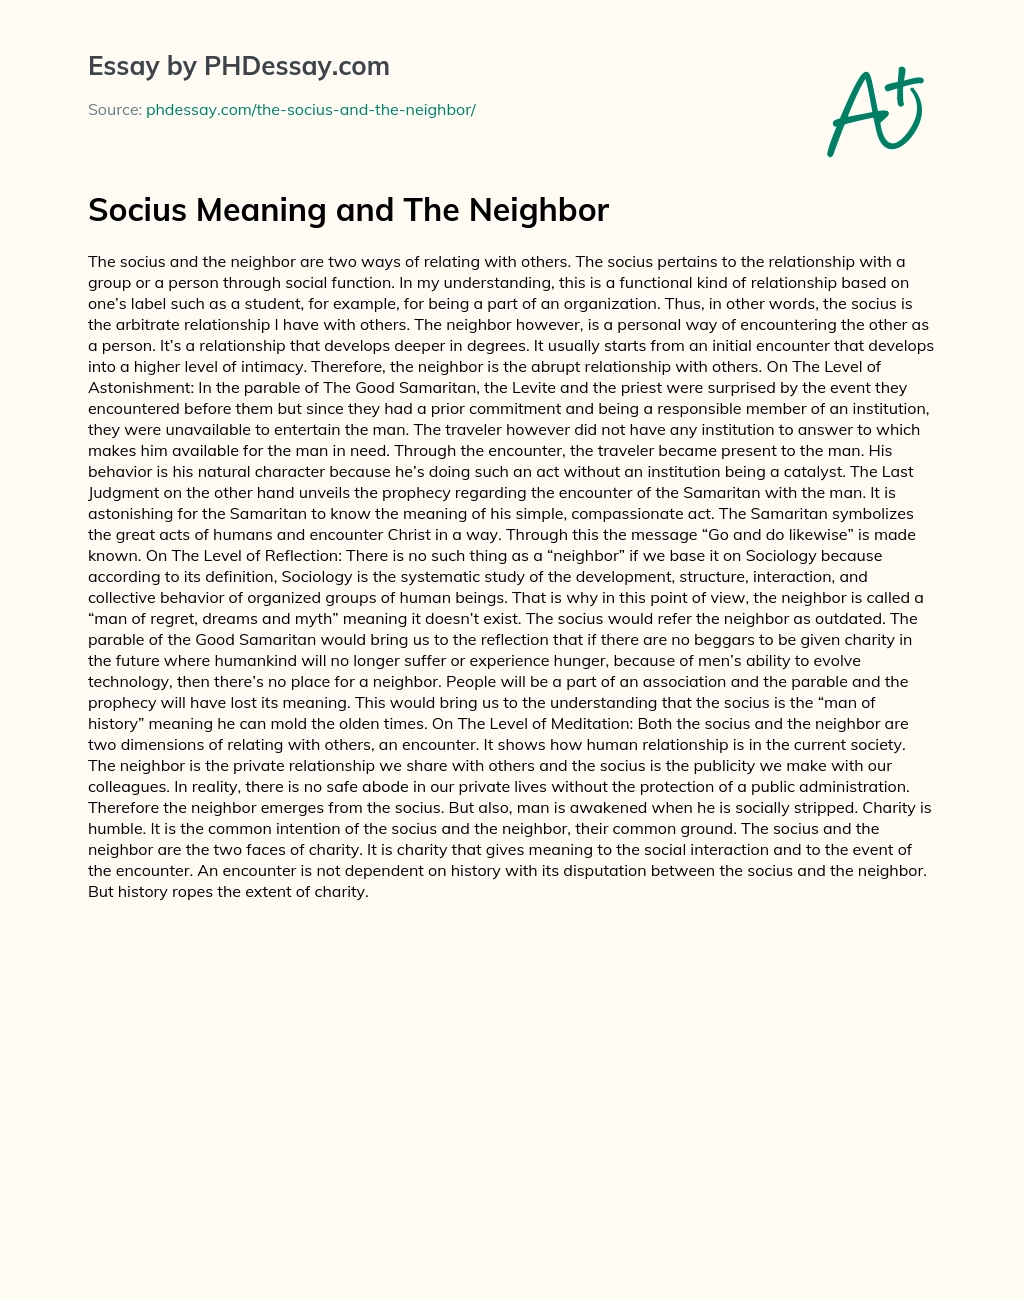 Socius Meaning and The Neighbor essay